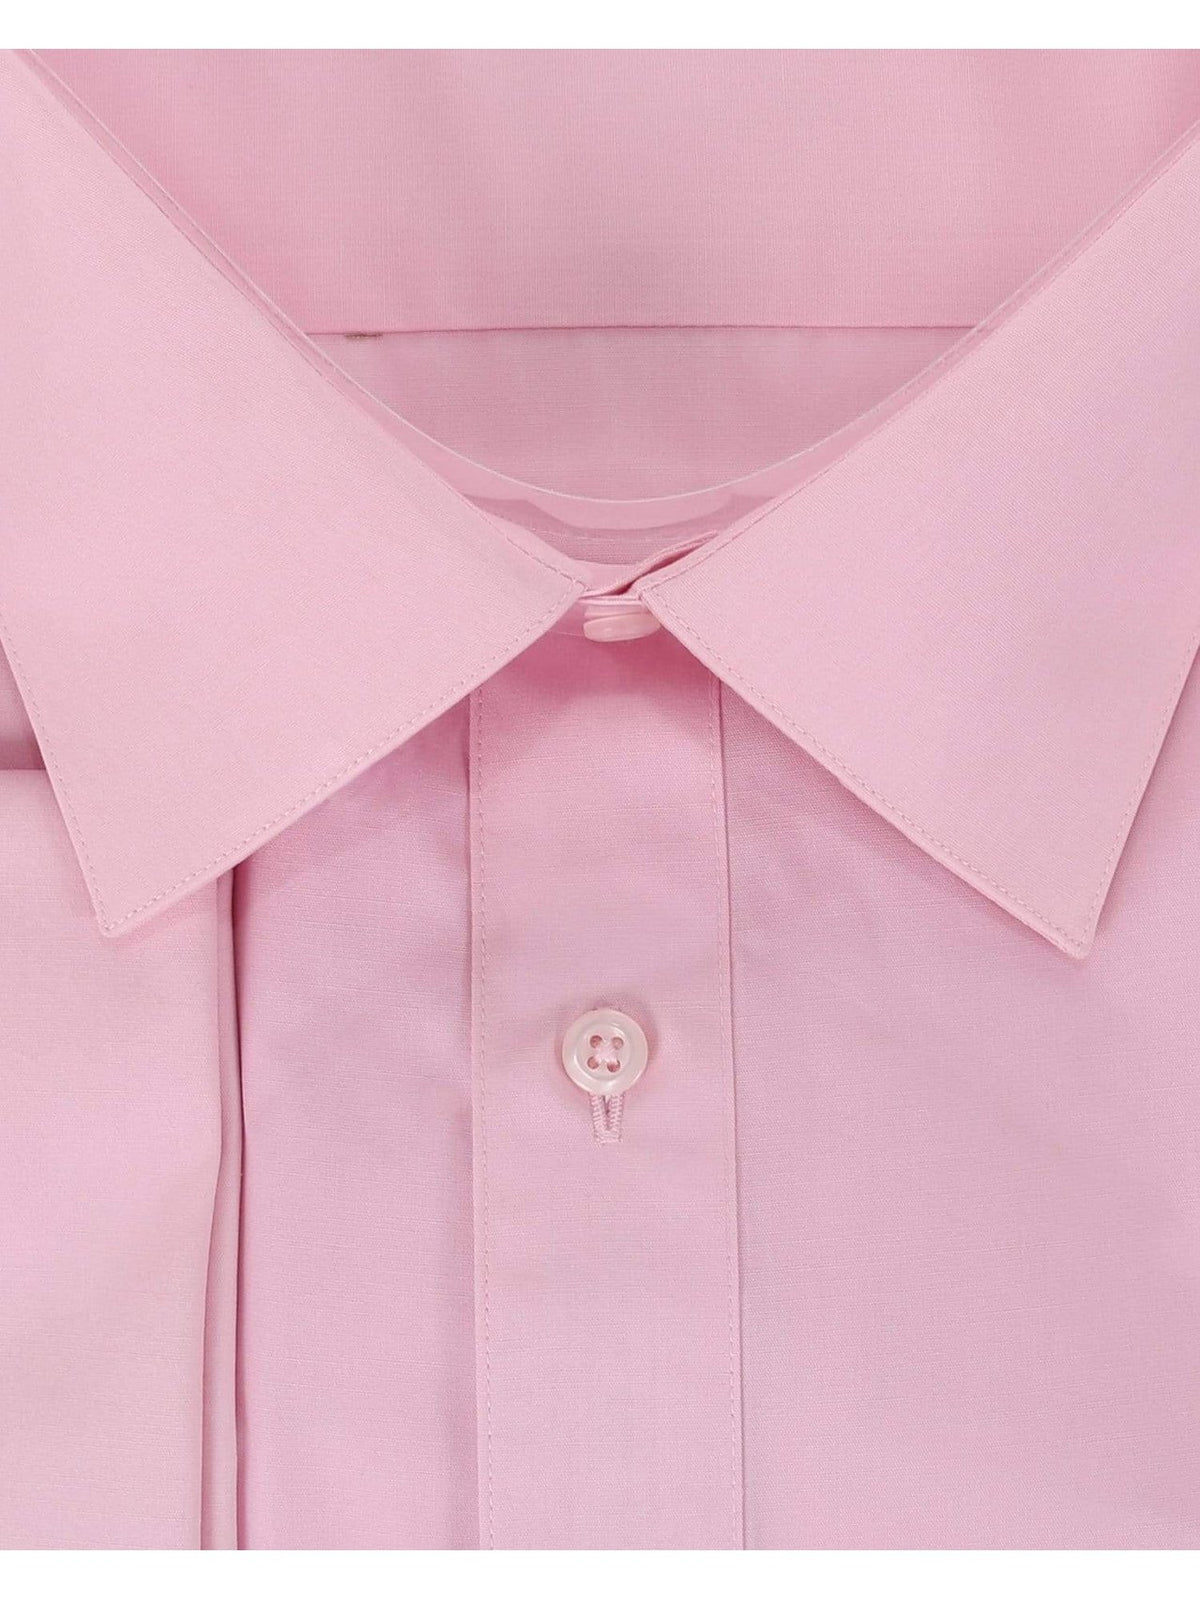 Brand M SHIRTS Mens Solid Pink Regular Fit Spread Collar French Cuff Dress Shirt